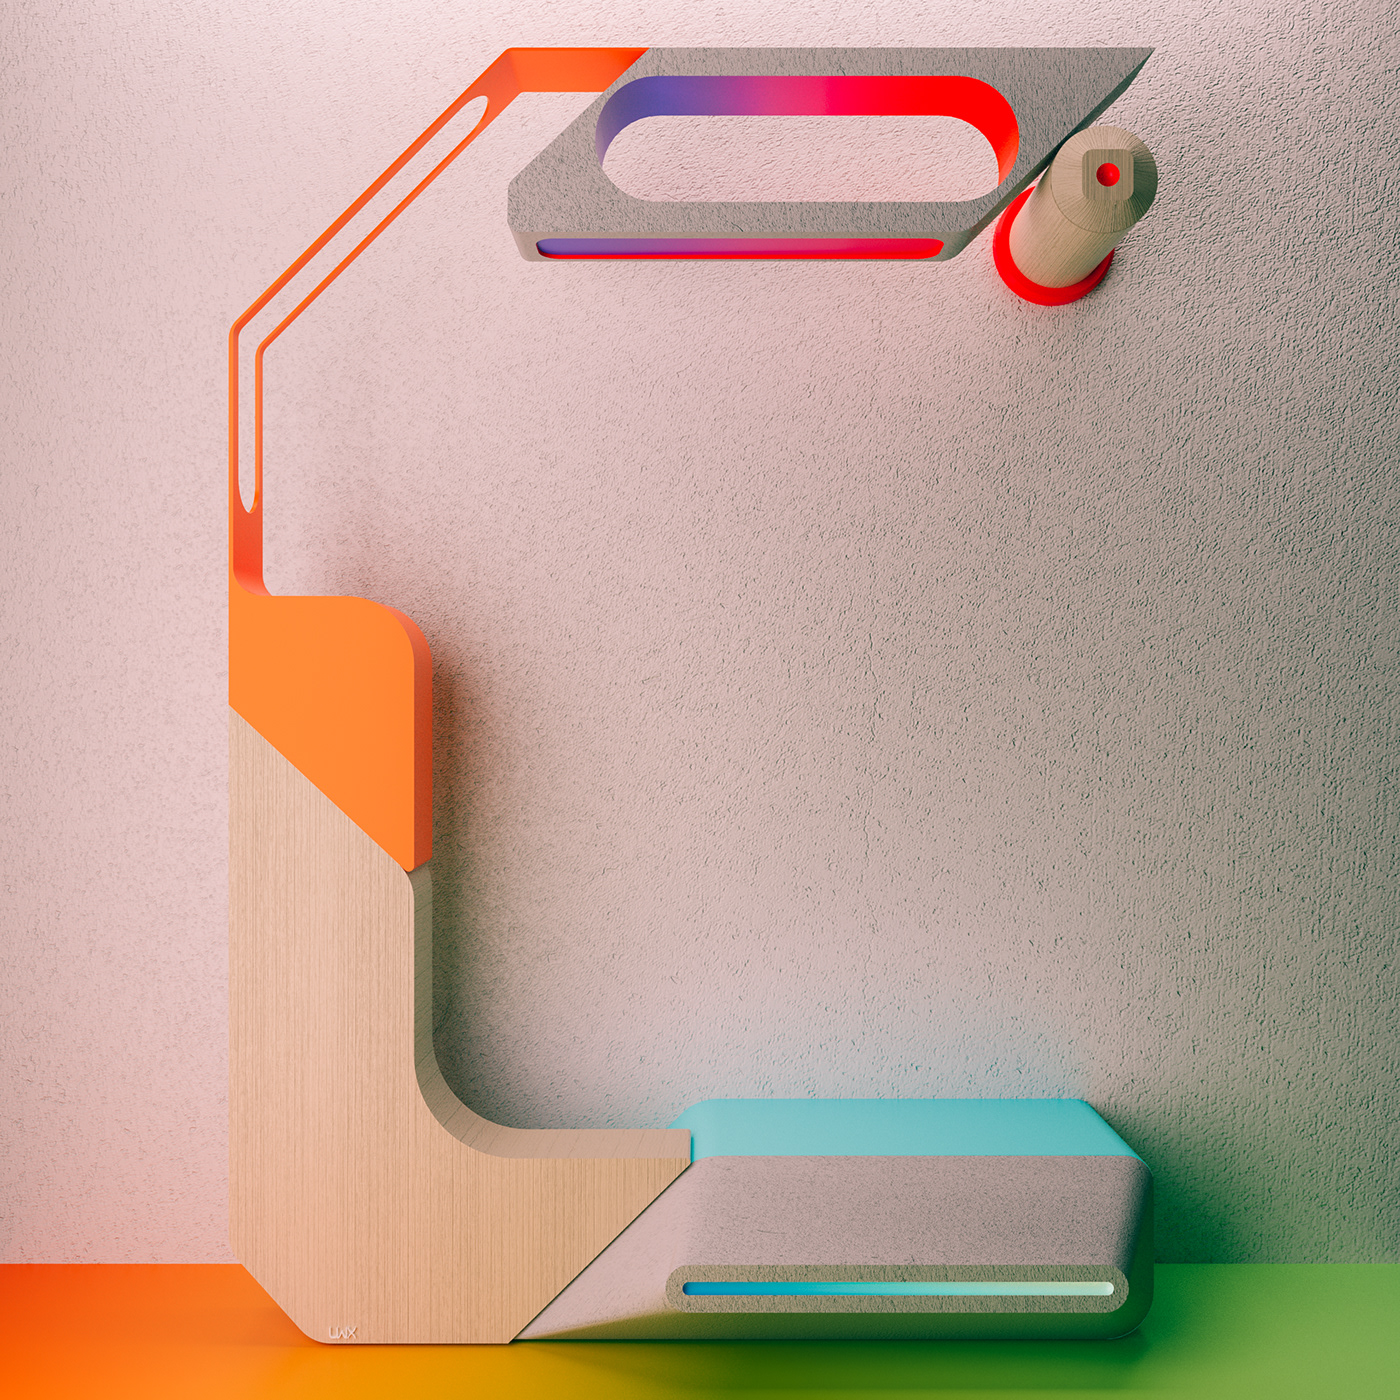 3DType letters geometry lights glass Modernart Playful characters 36daysoftype 36daysoftype05